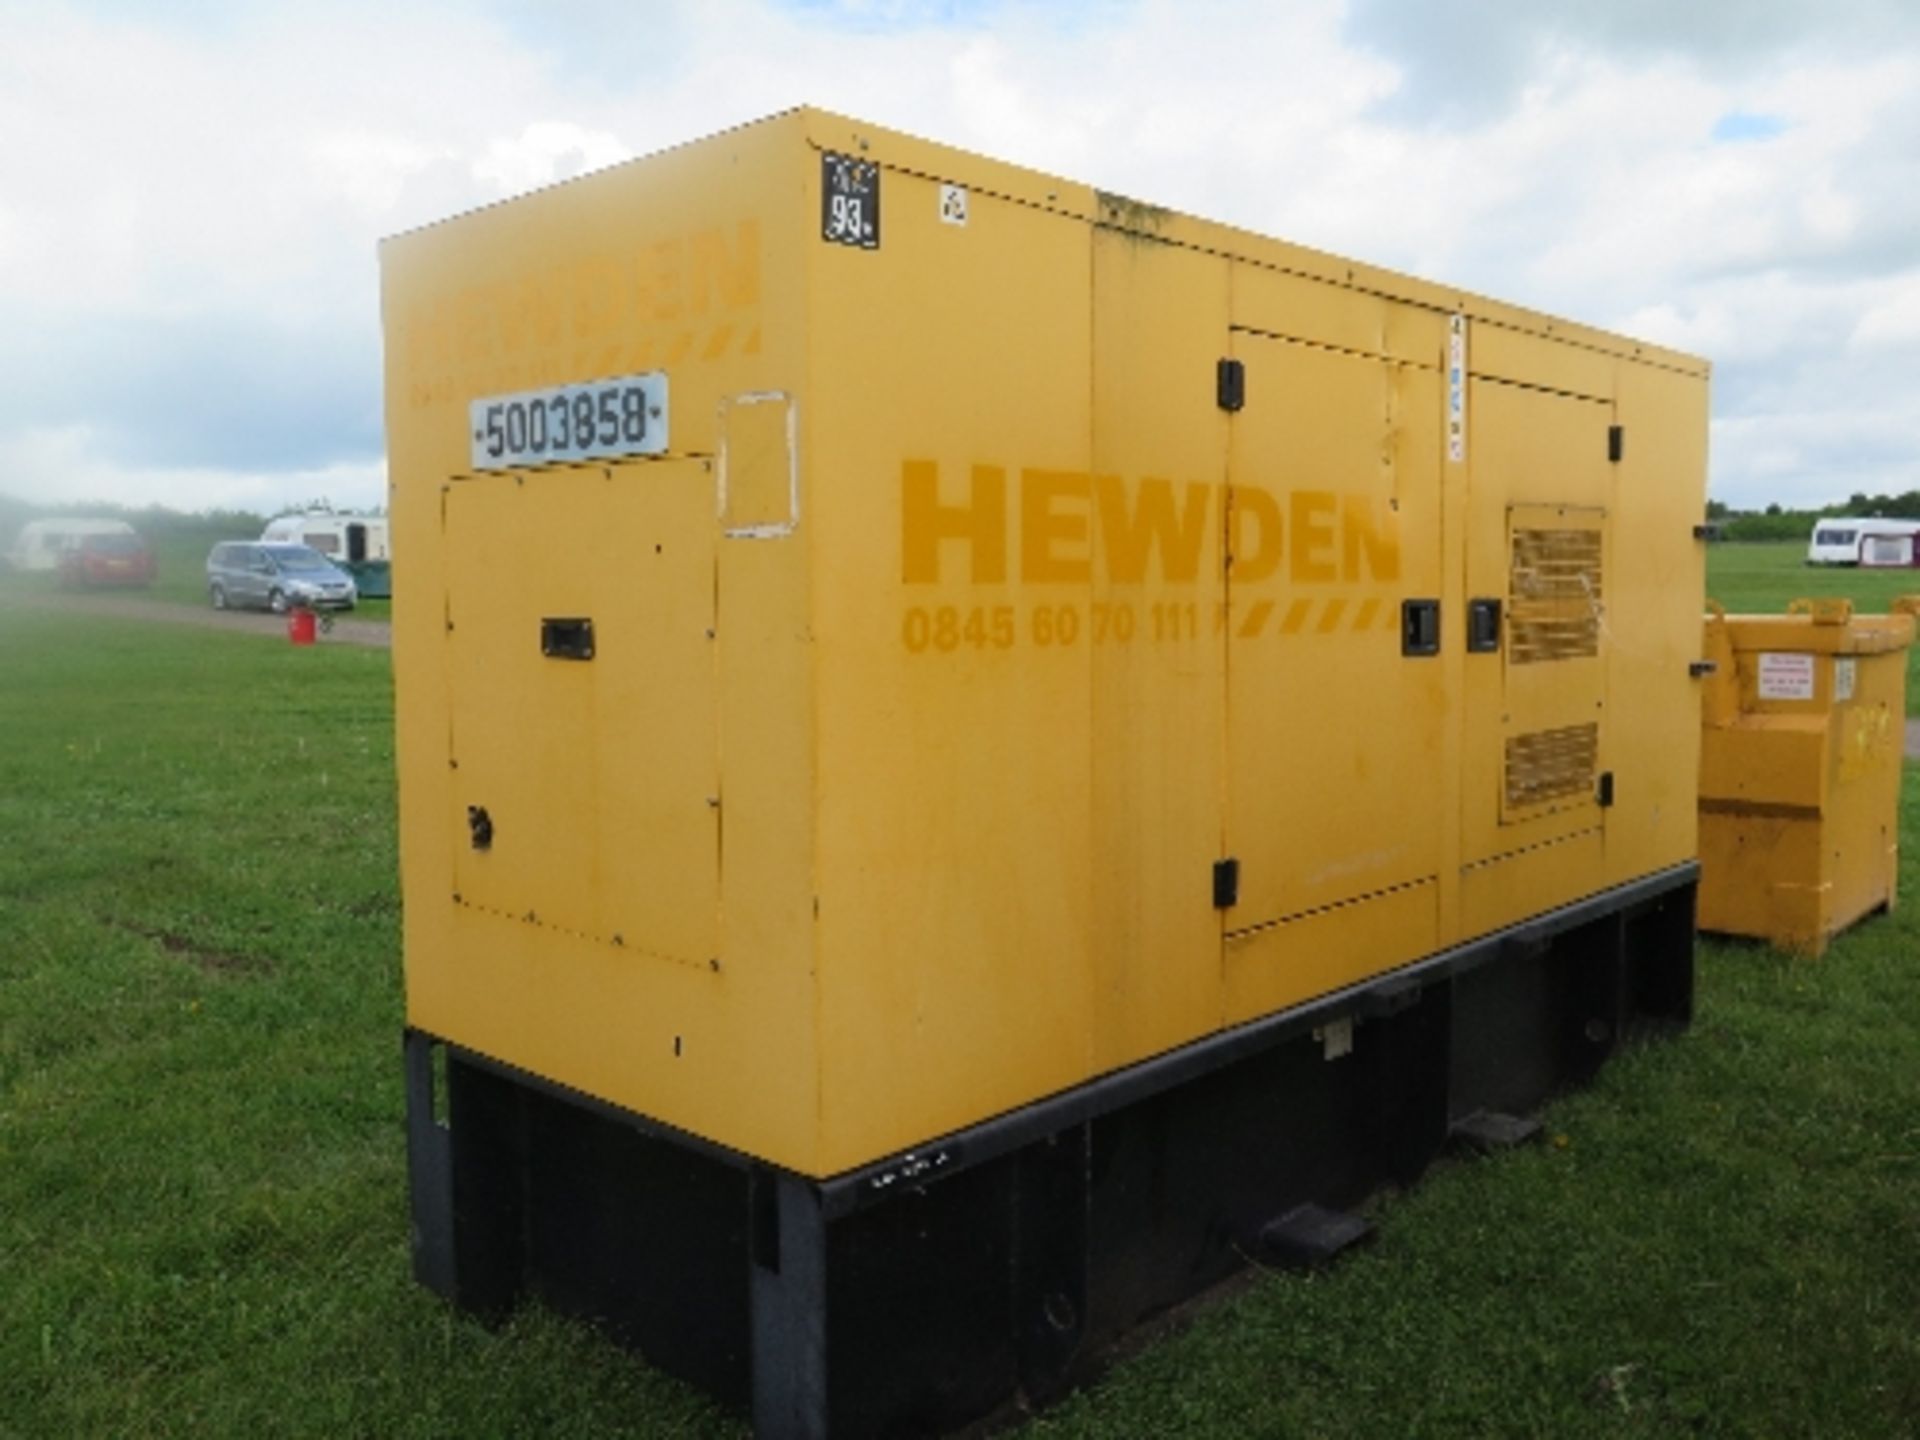 Caterpillar XQE80 generator 17821 hrs 5003858
PERKINS POWER - RUNS AND MAKES POWER
ALL LOTS are